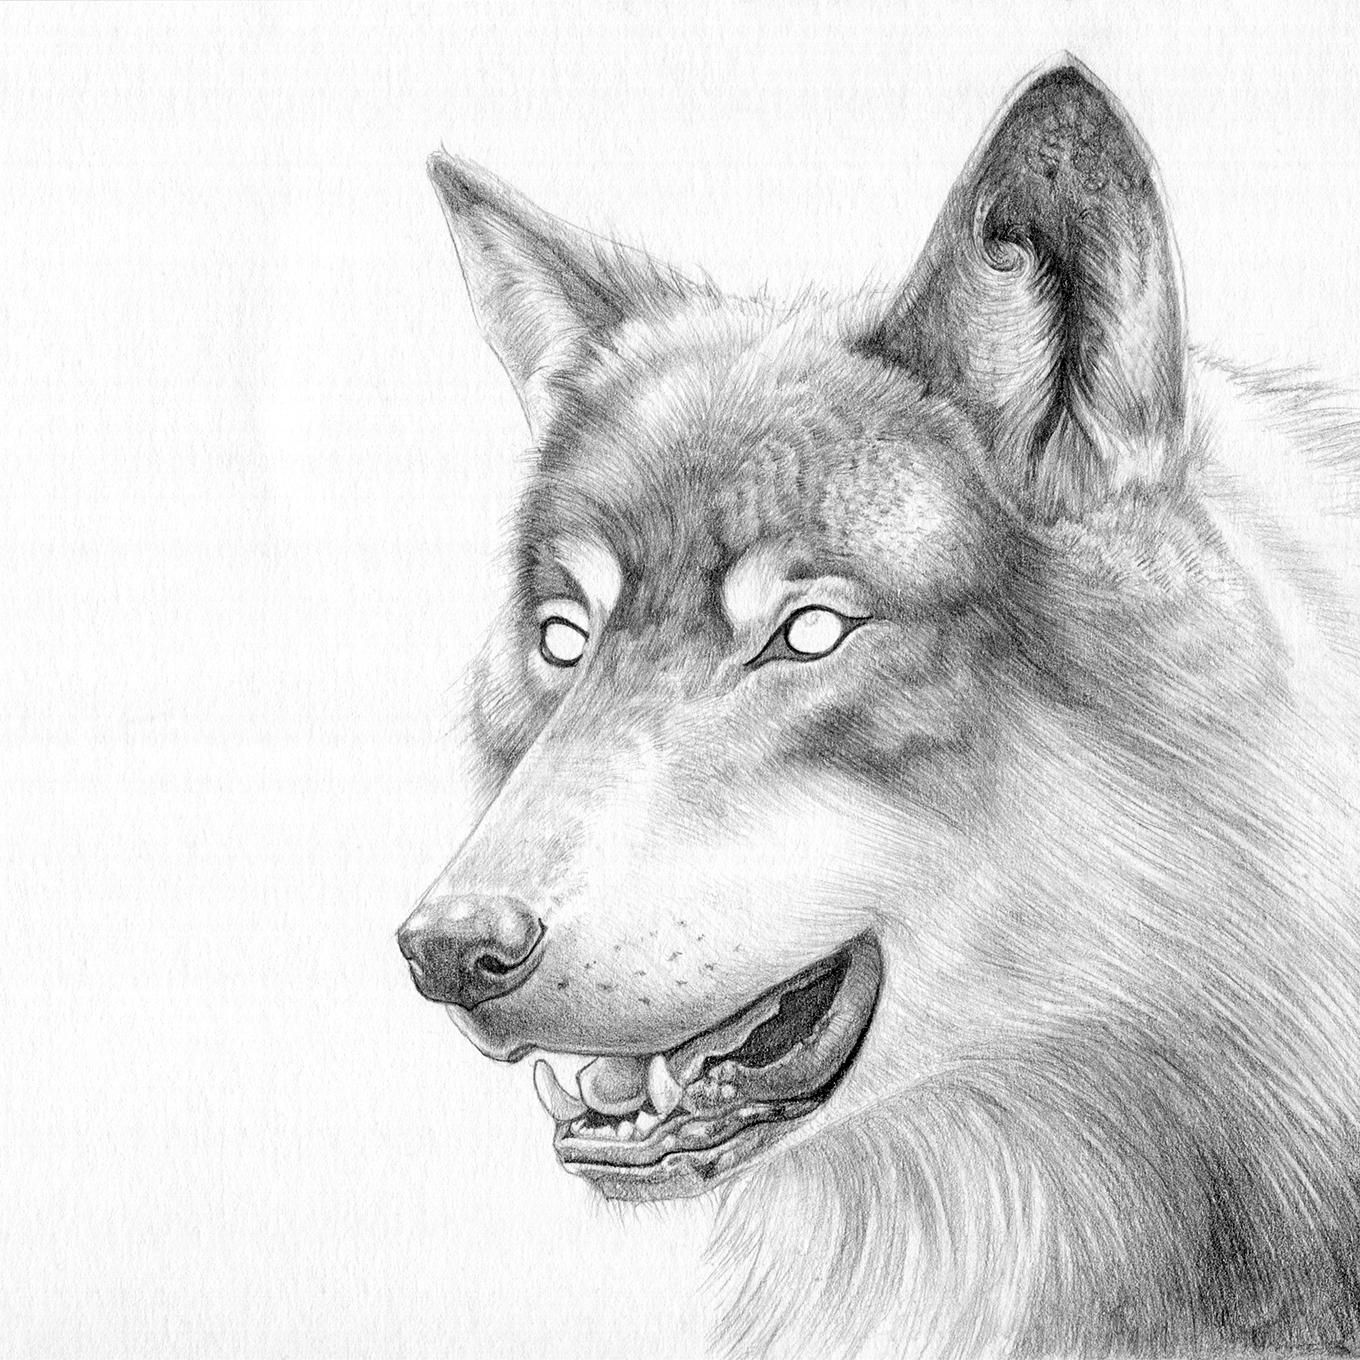 Wolf, Pencil, A5 Posted By U Lukalap To R Art. Digital Art Fantasy, Psychedelic Illustration, Fantasy Artist